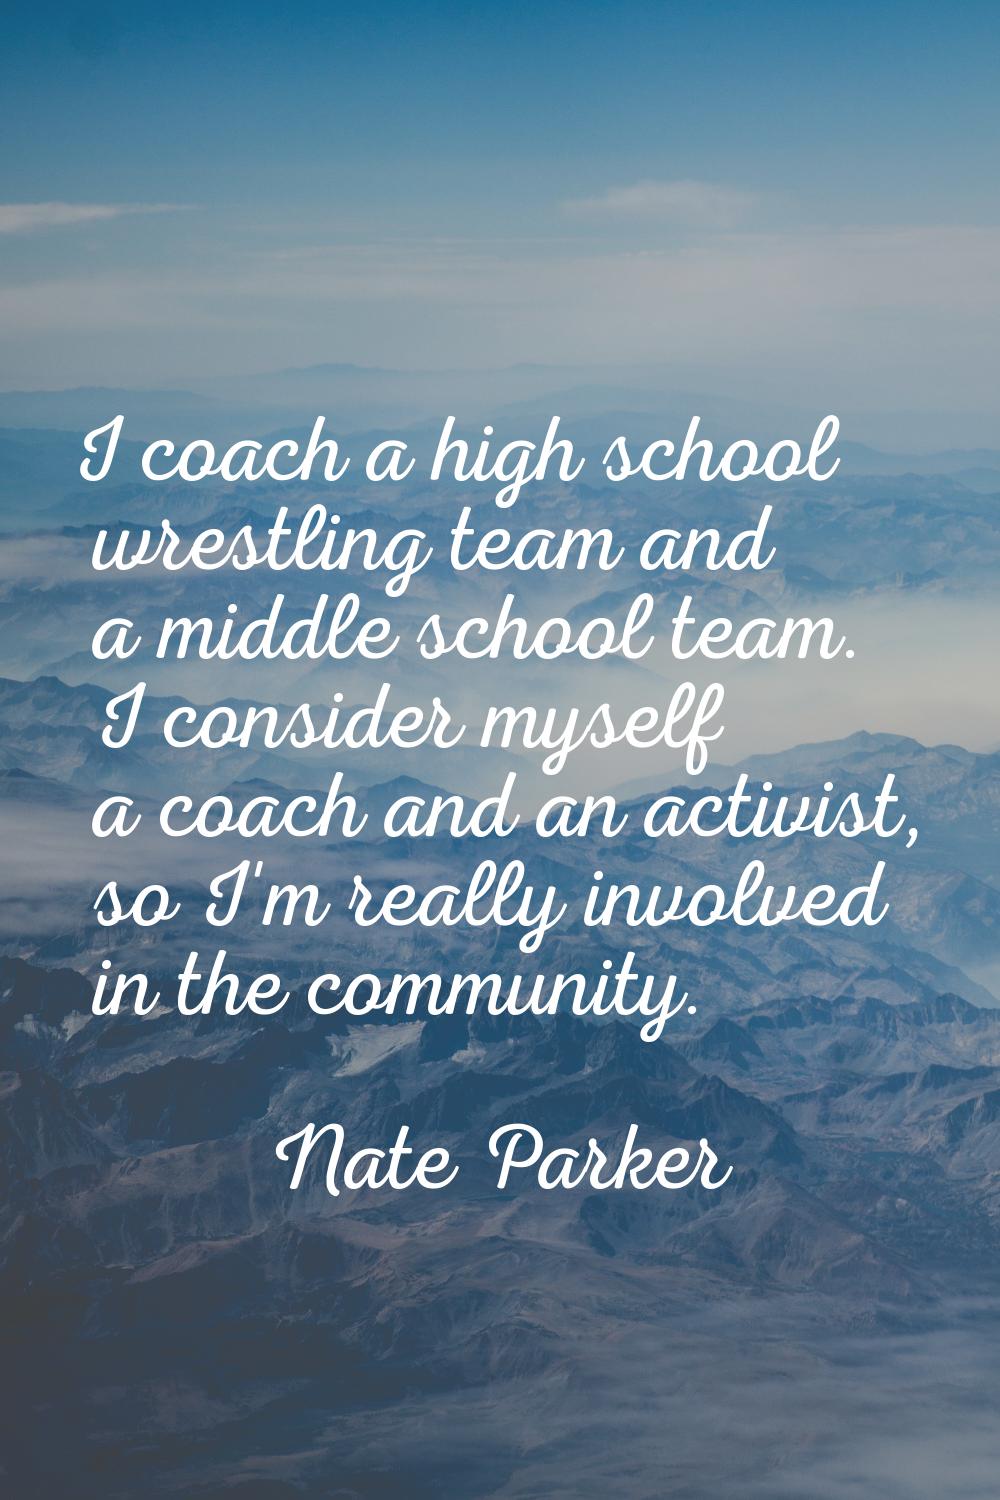 I coach a high school wrestling team and a middle school team. I consider myself a coach and an act